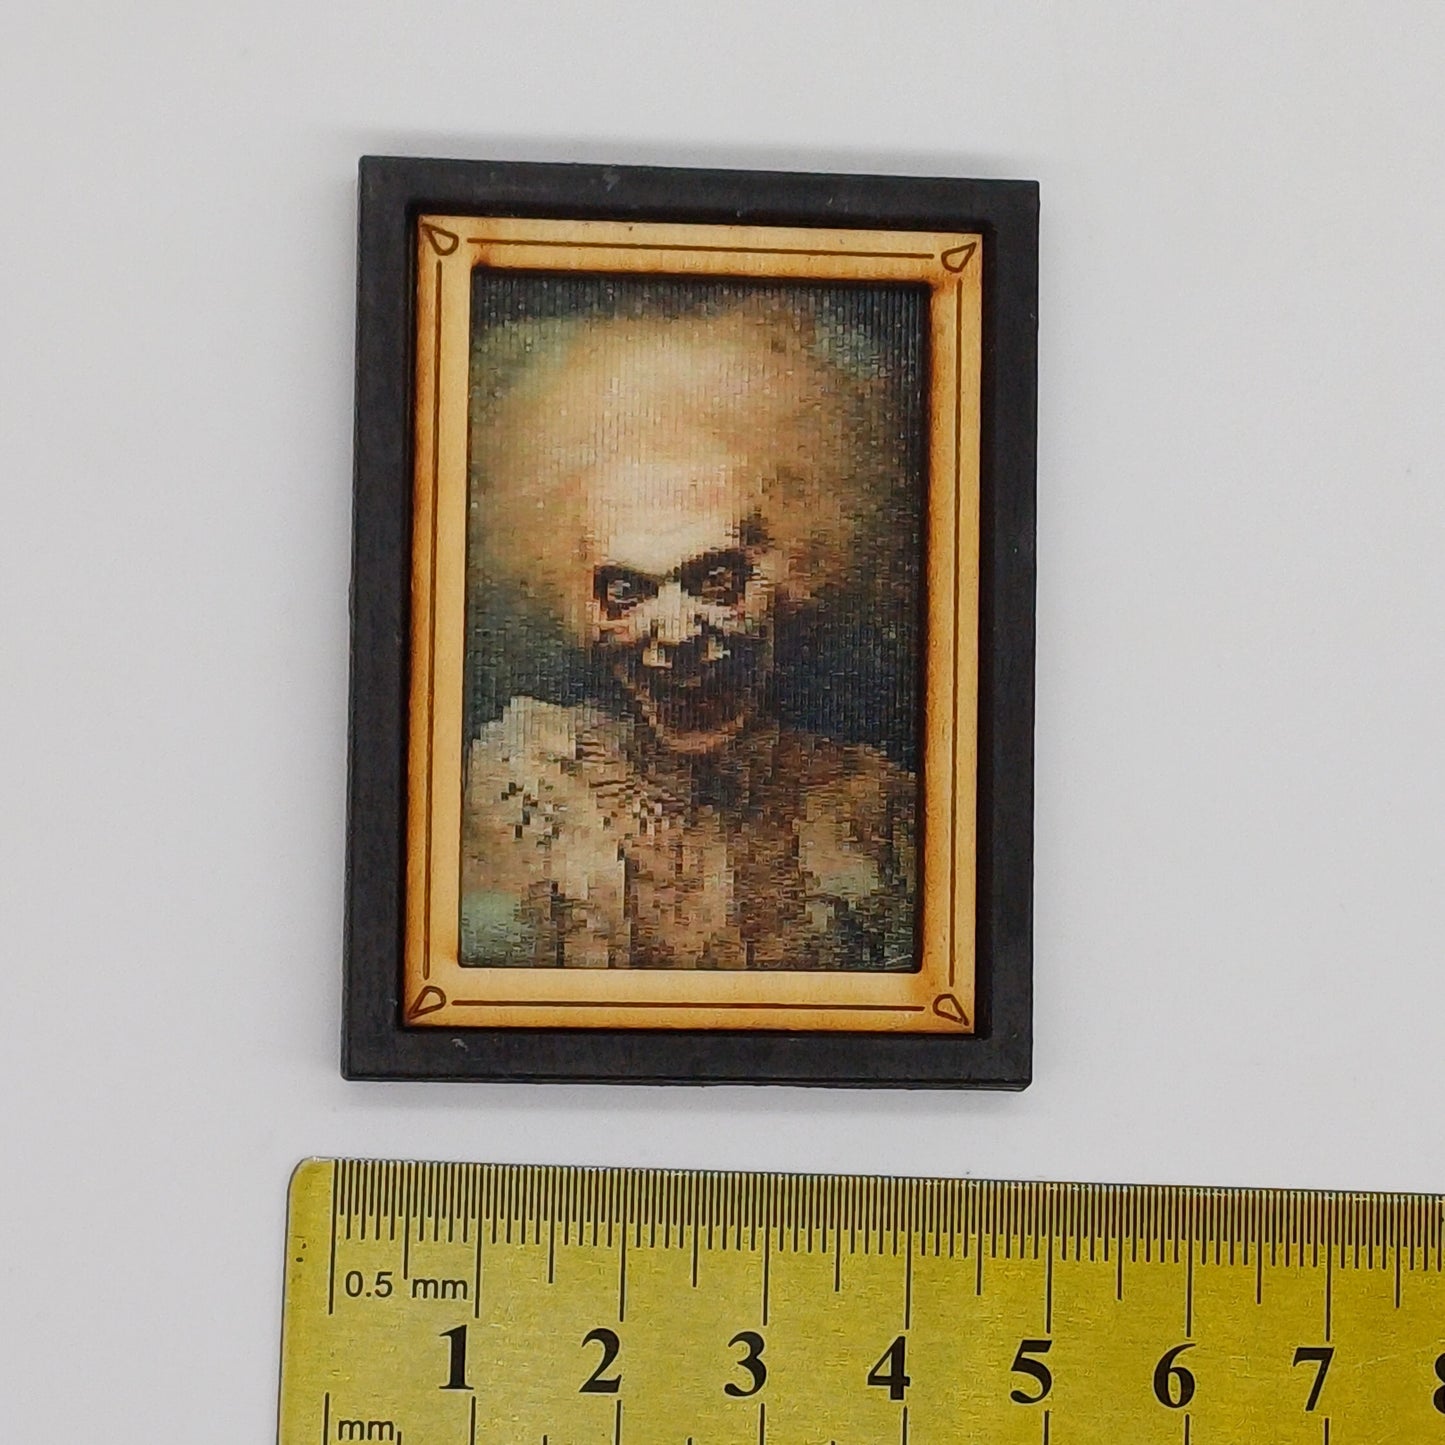 Miniature horror painting with changing image